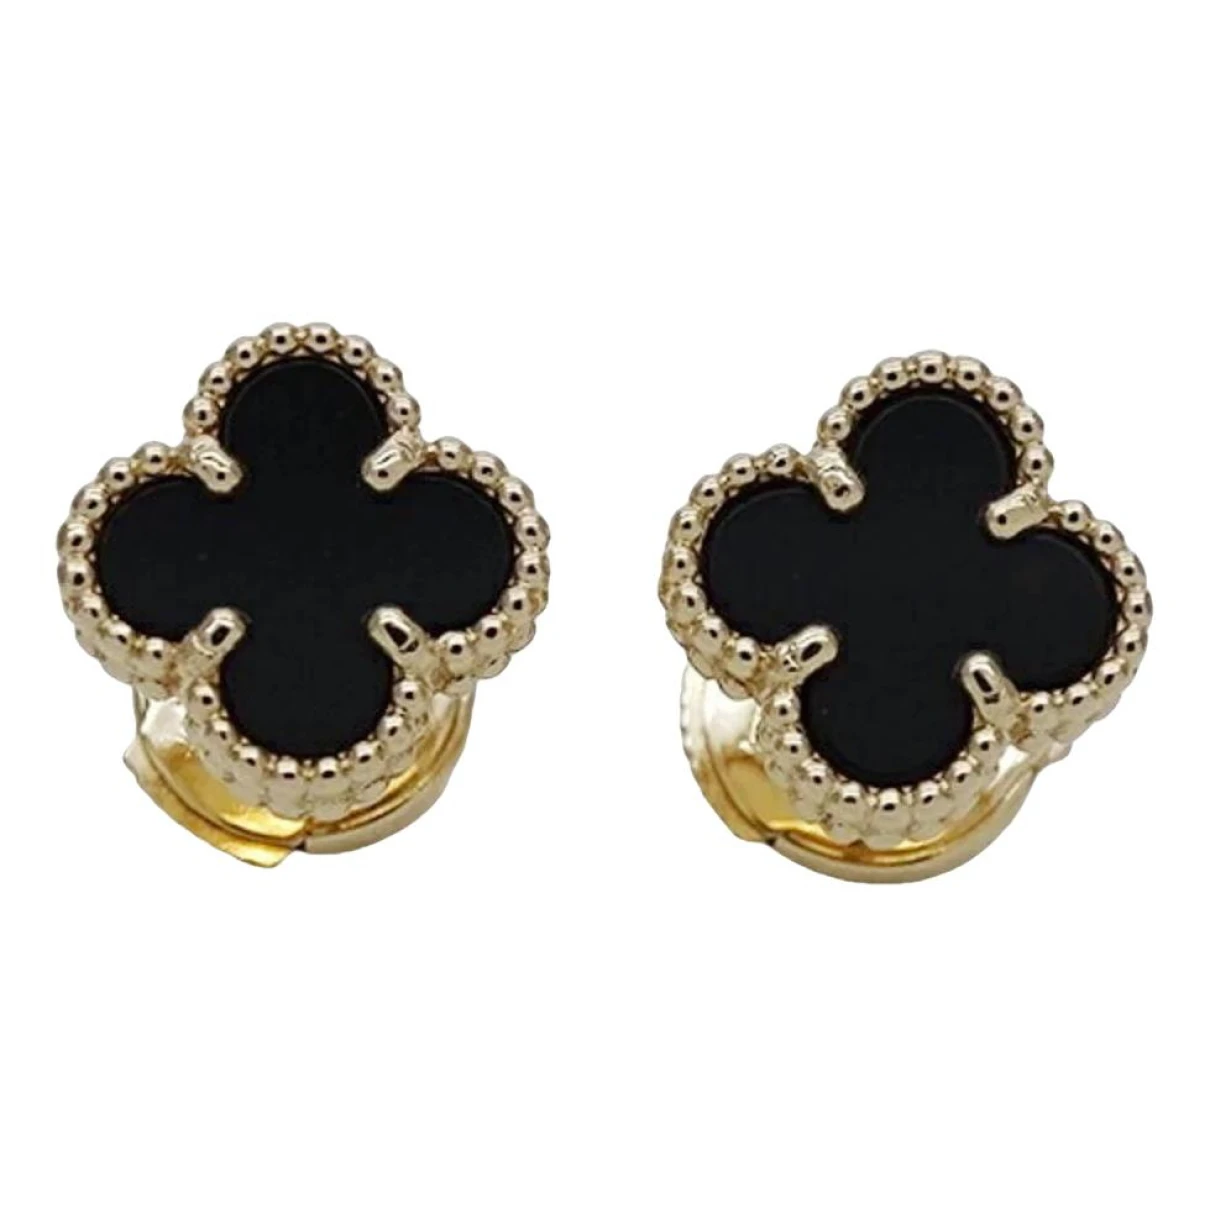 jewellery Van Cleef & Arpels earrings Vintage Alhambra for Female Yellow gold. Used condition